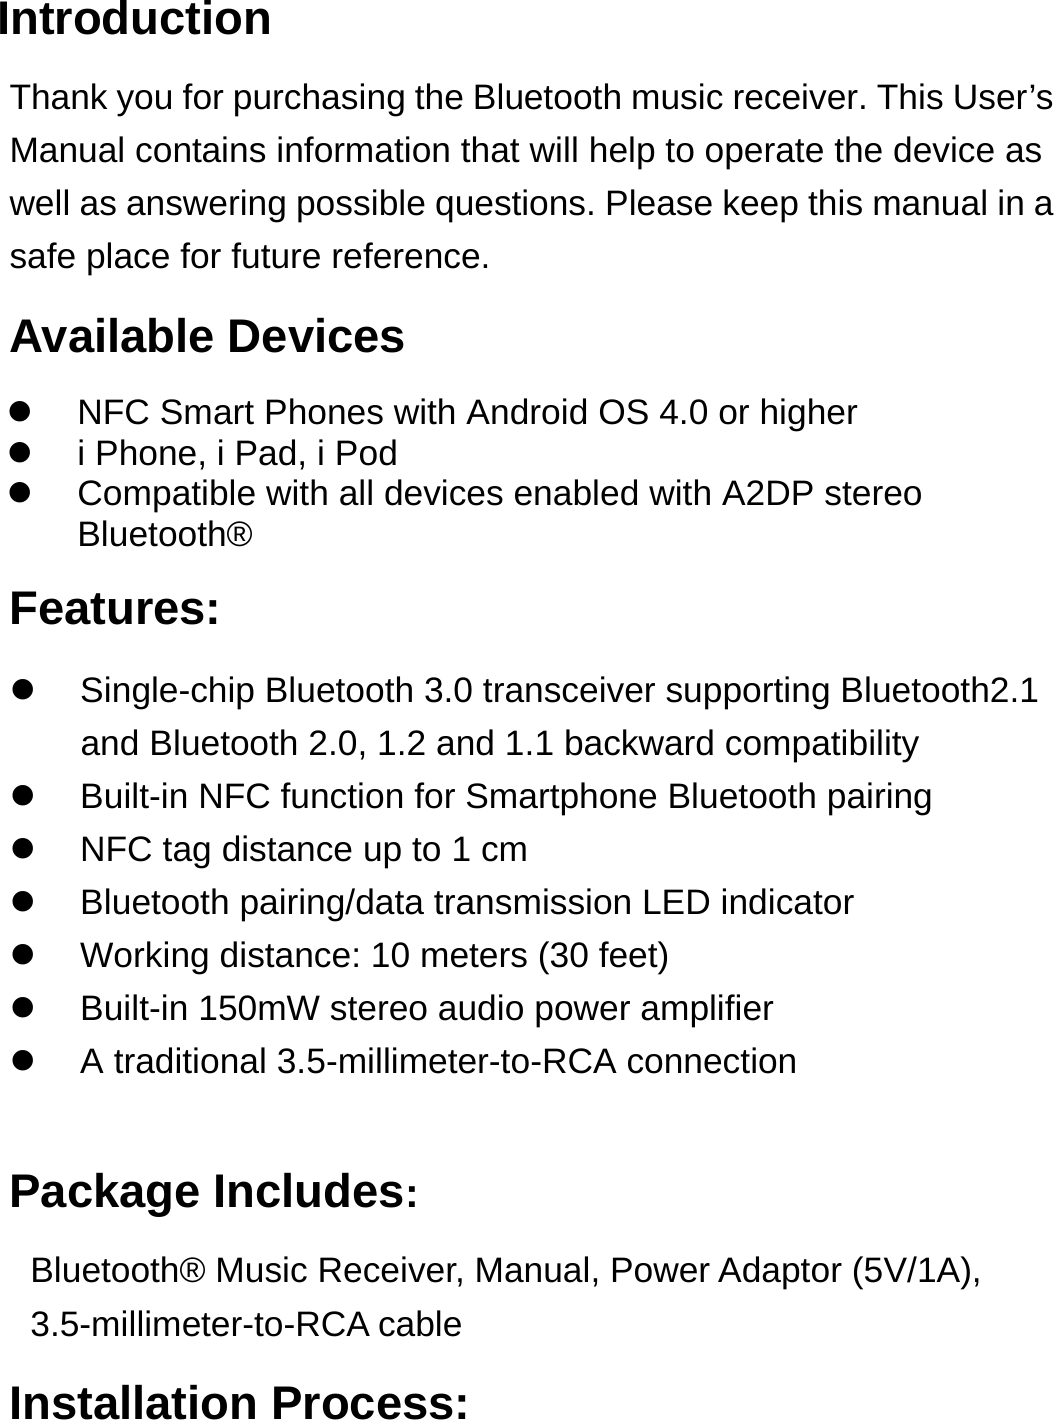 Introduction Thank you for purchasing the Bluetooth music receiver. This User’s Manual contains information that will help to operate the device as well as answering possible questions. Please keep this manual in a safe place for future reference.   Available Devices Features:   Single-chip Bluetooth 3.0 transceiver supporting Bluetooth2.1 and Bluetooth 2.0, 1.2 and 1.1 backward compatibility   Built-in NFC function for Smartphone Bluetooth pairing   NFC tag distance up to 1 cm    Bluetooth pairing/data transmission LED indicator     Working distance: 10 meters (30 feet)   Built-in 150mW stereo audio power amplifier   A traditional 3.5-millimeter-to-RCA connection  Package Includes: Bluetooth® Music Receiver, Manual, Power Adaptor (5V/1A), 3.5-millimeter-to-RCA cable Installation Process:   NFC Smart Phones with Android OS 4.0 or higher   i Phone, i Pad, i Pod   Compatible with all devices enabled with A2DP stereo Bluetooth® 